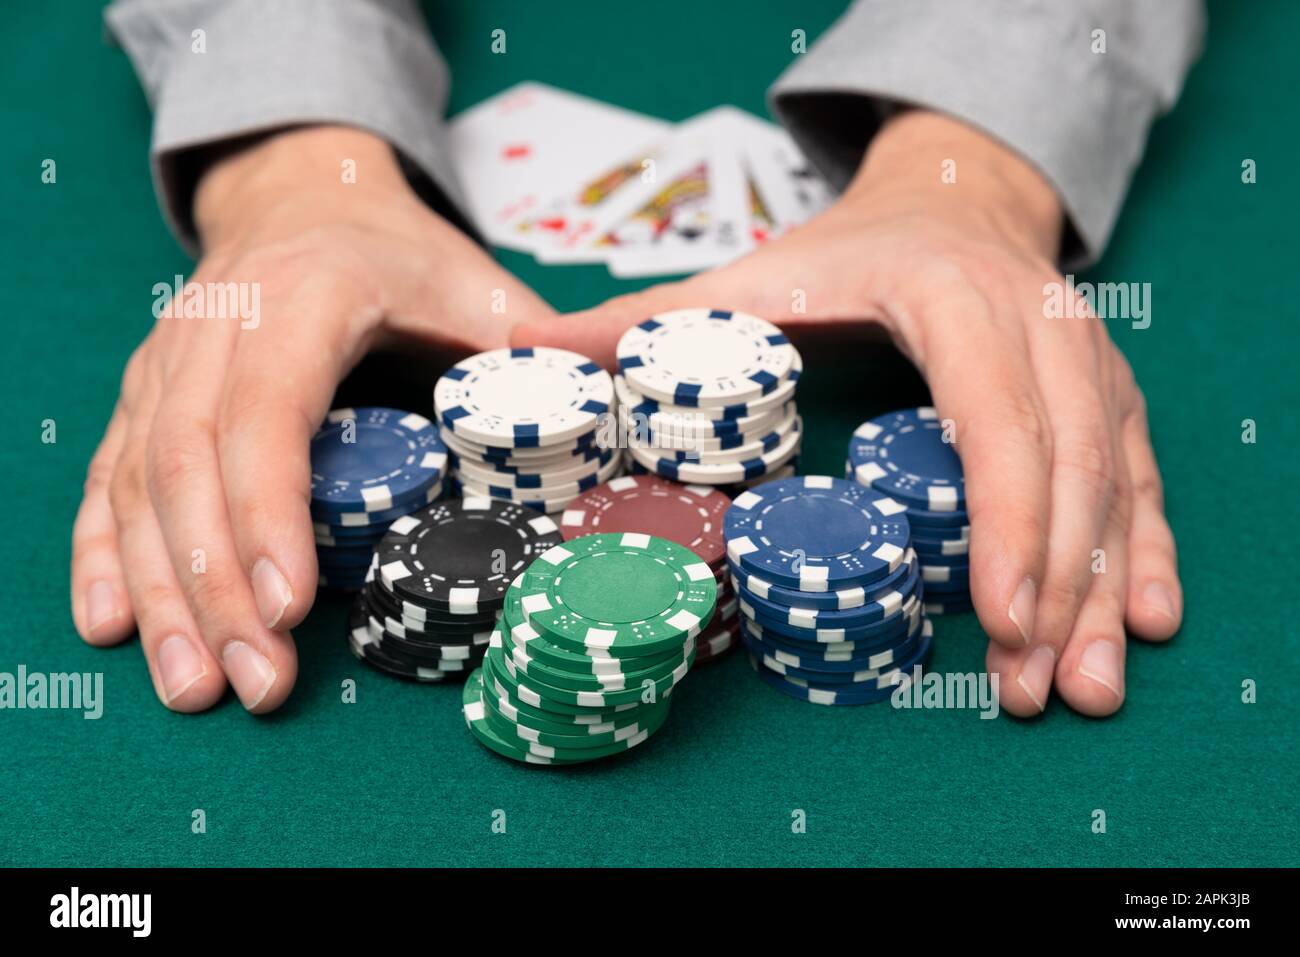 Man plays poker in the casino. Man collecting stack of poker chips, gambling concept. Stock Photo